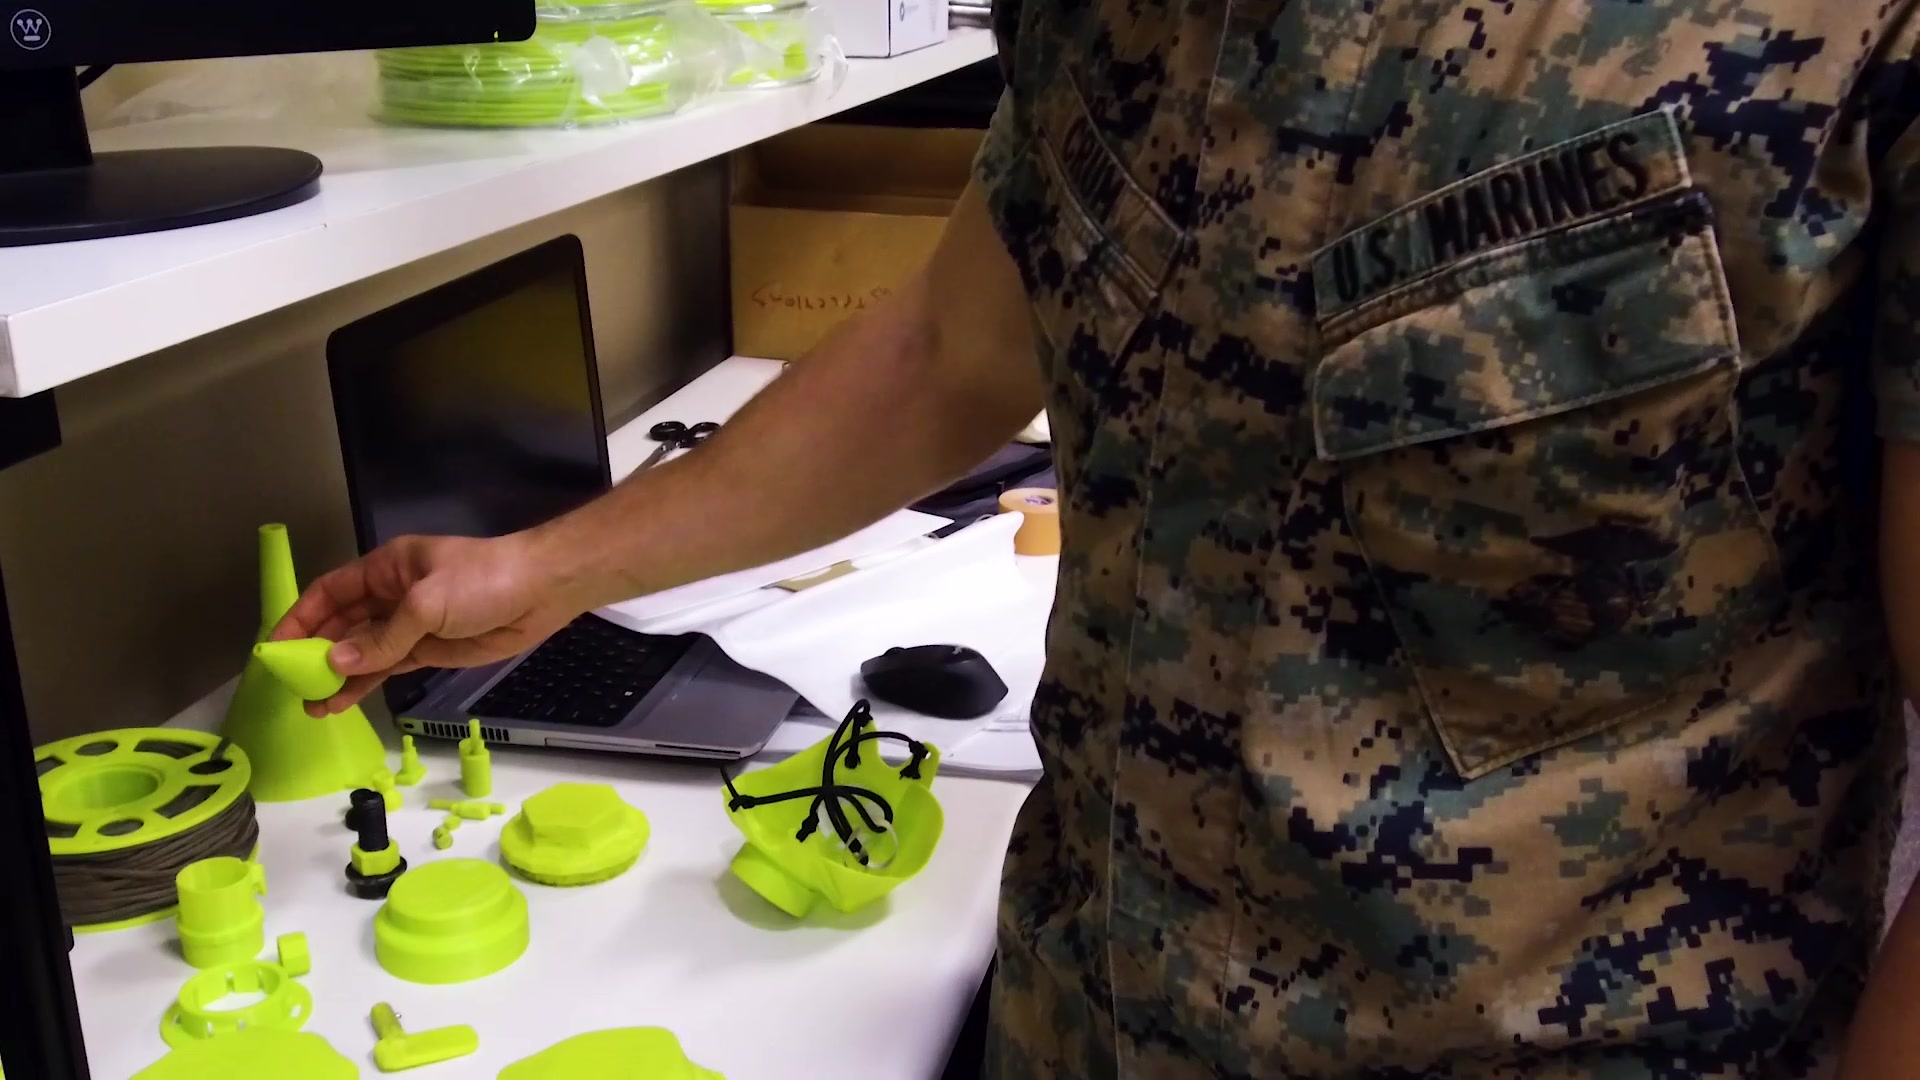 Marines with Marine Air Support Squadron 1 print respiratory masks with a 3-D printer at Marine Corps Air Station Cherry Point, North Carolina, March 26, 2020. They are printing the masks in response to the shortage of medical supplies caused by the COVID-19 pandemic. (U.S. Marine Corps video by Cpl. Cody Rowe)

Song credit: Pitch Black - Jens Kiilstofte
machinimasound.com/?s=Pitch+Black#